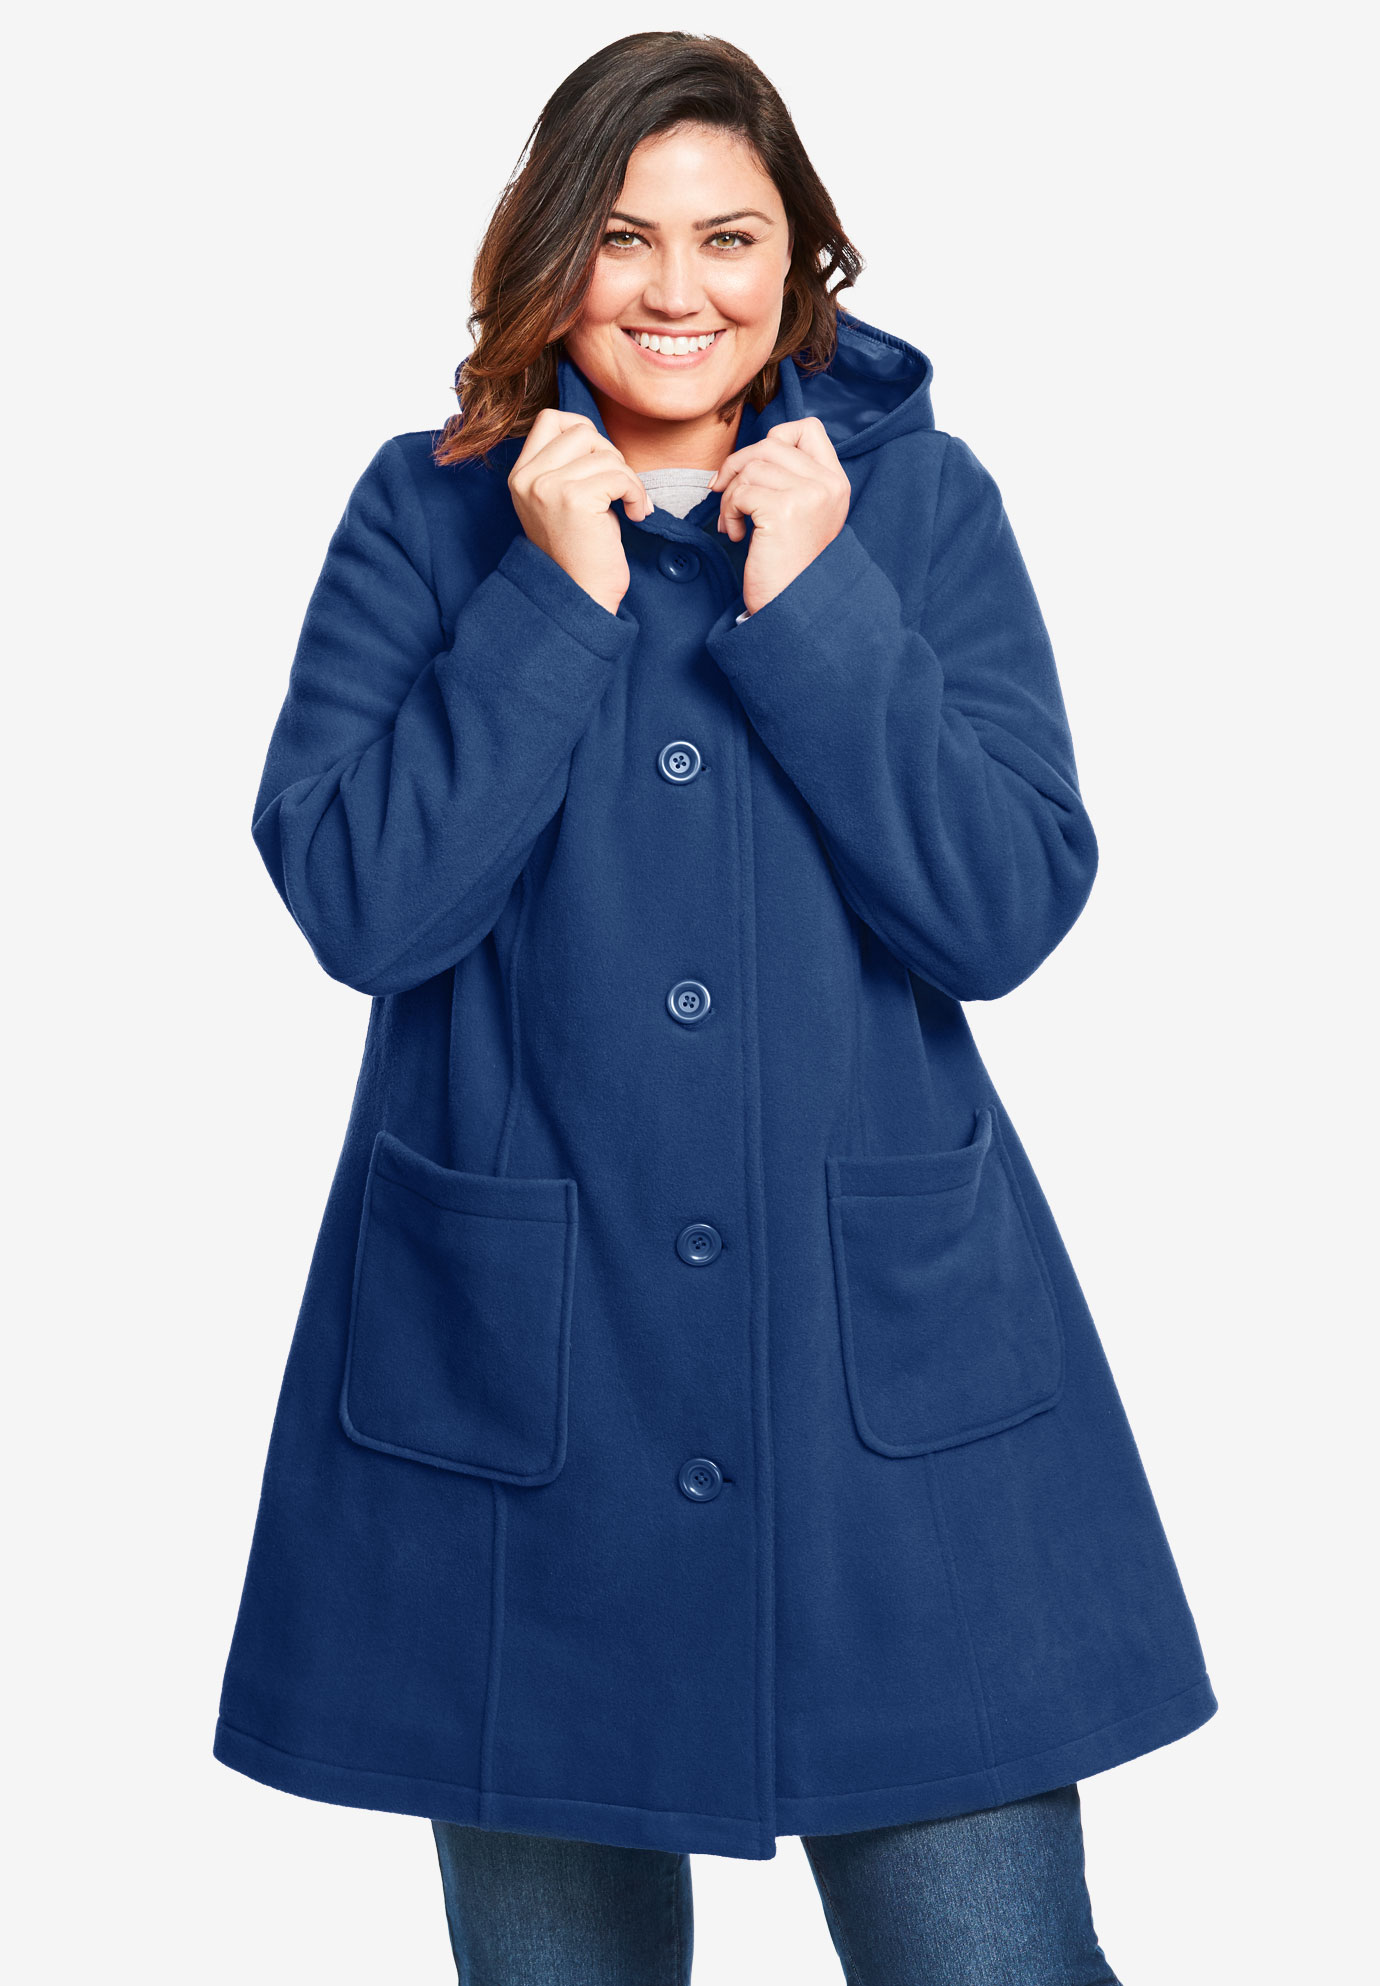 Hooded A-Line Fleece Jacket| Plus Size Jackets | Woman Within